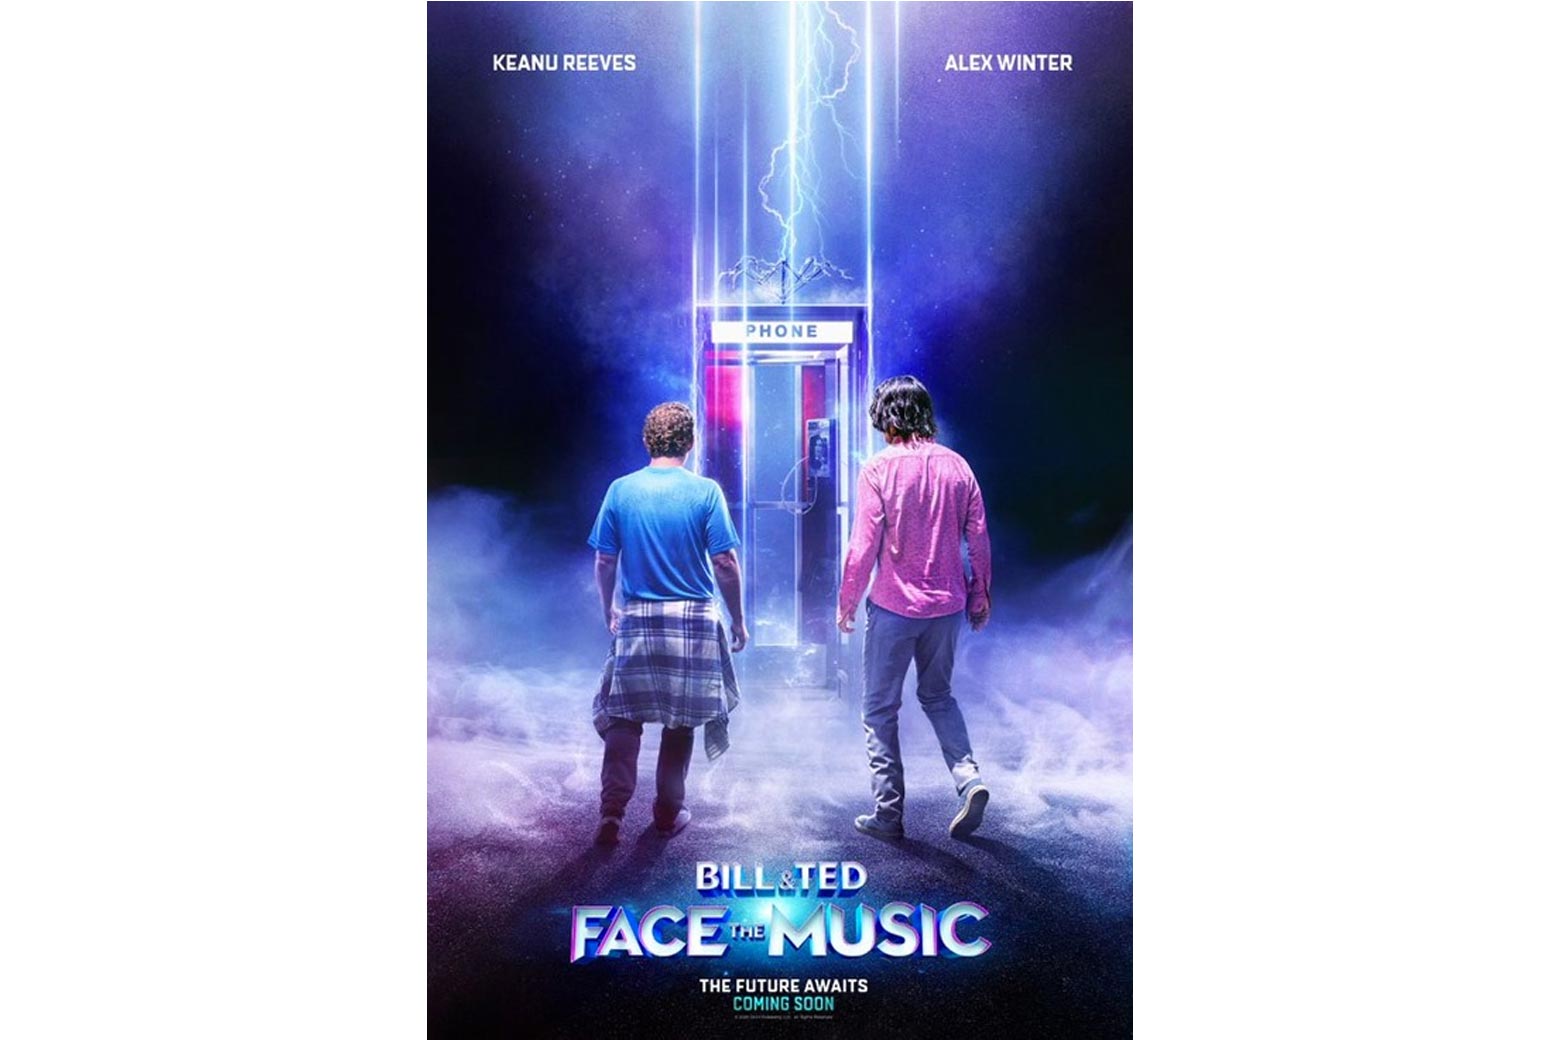 Bill & Ted Face the Music movie poster